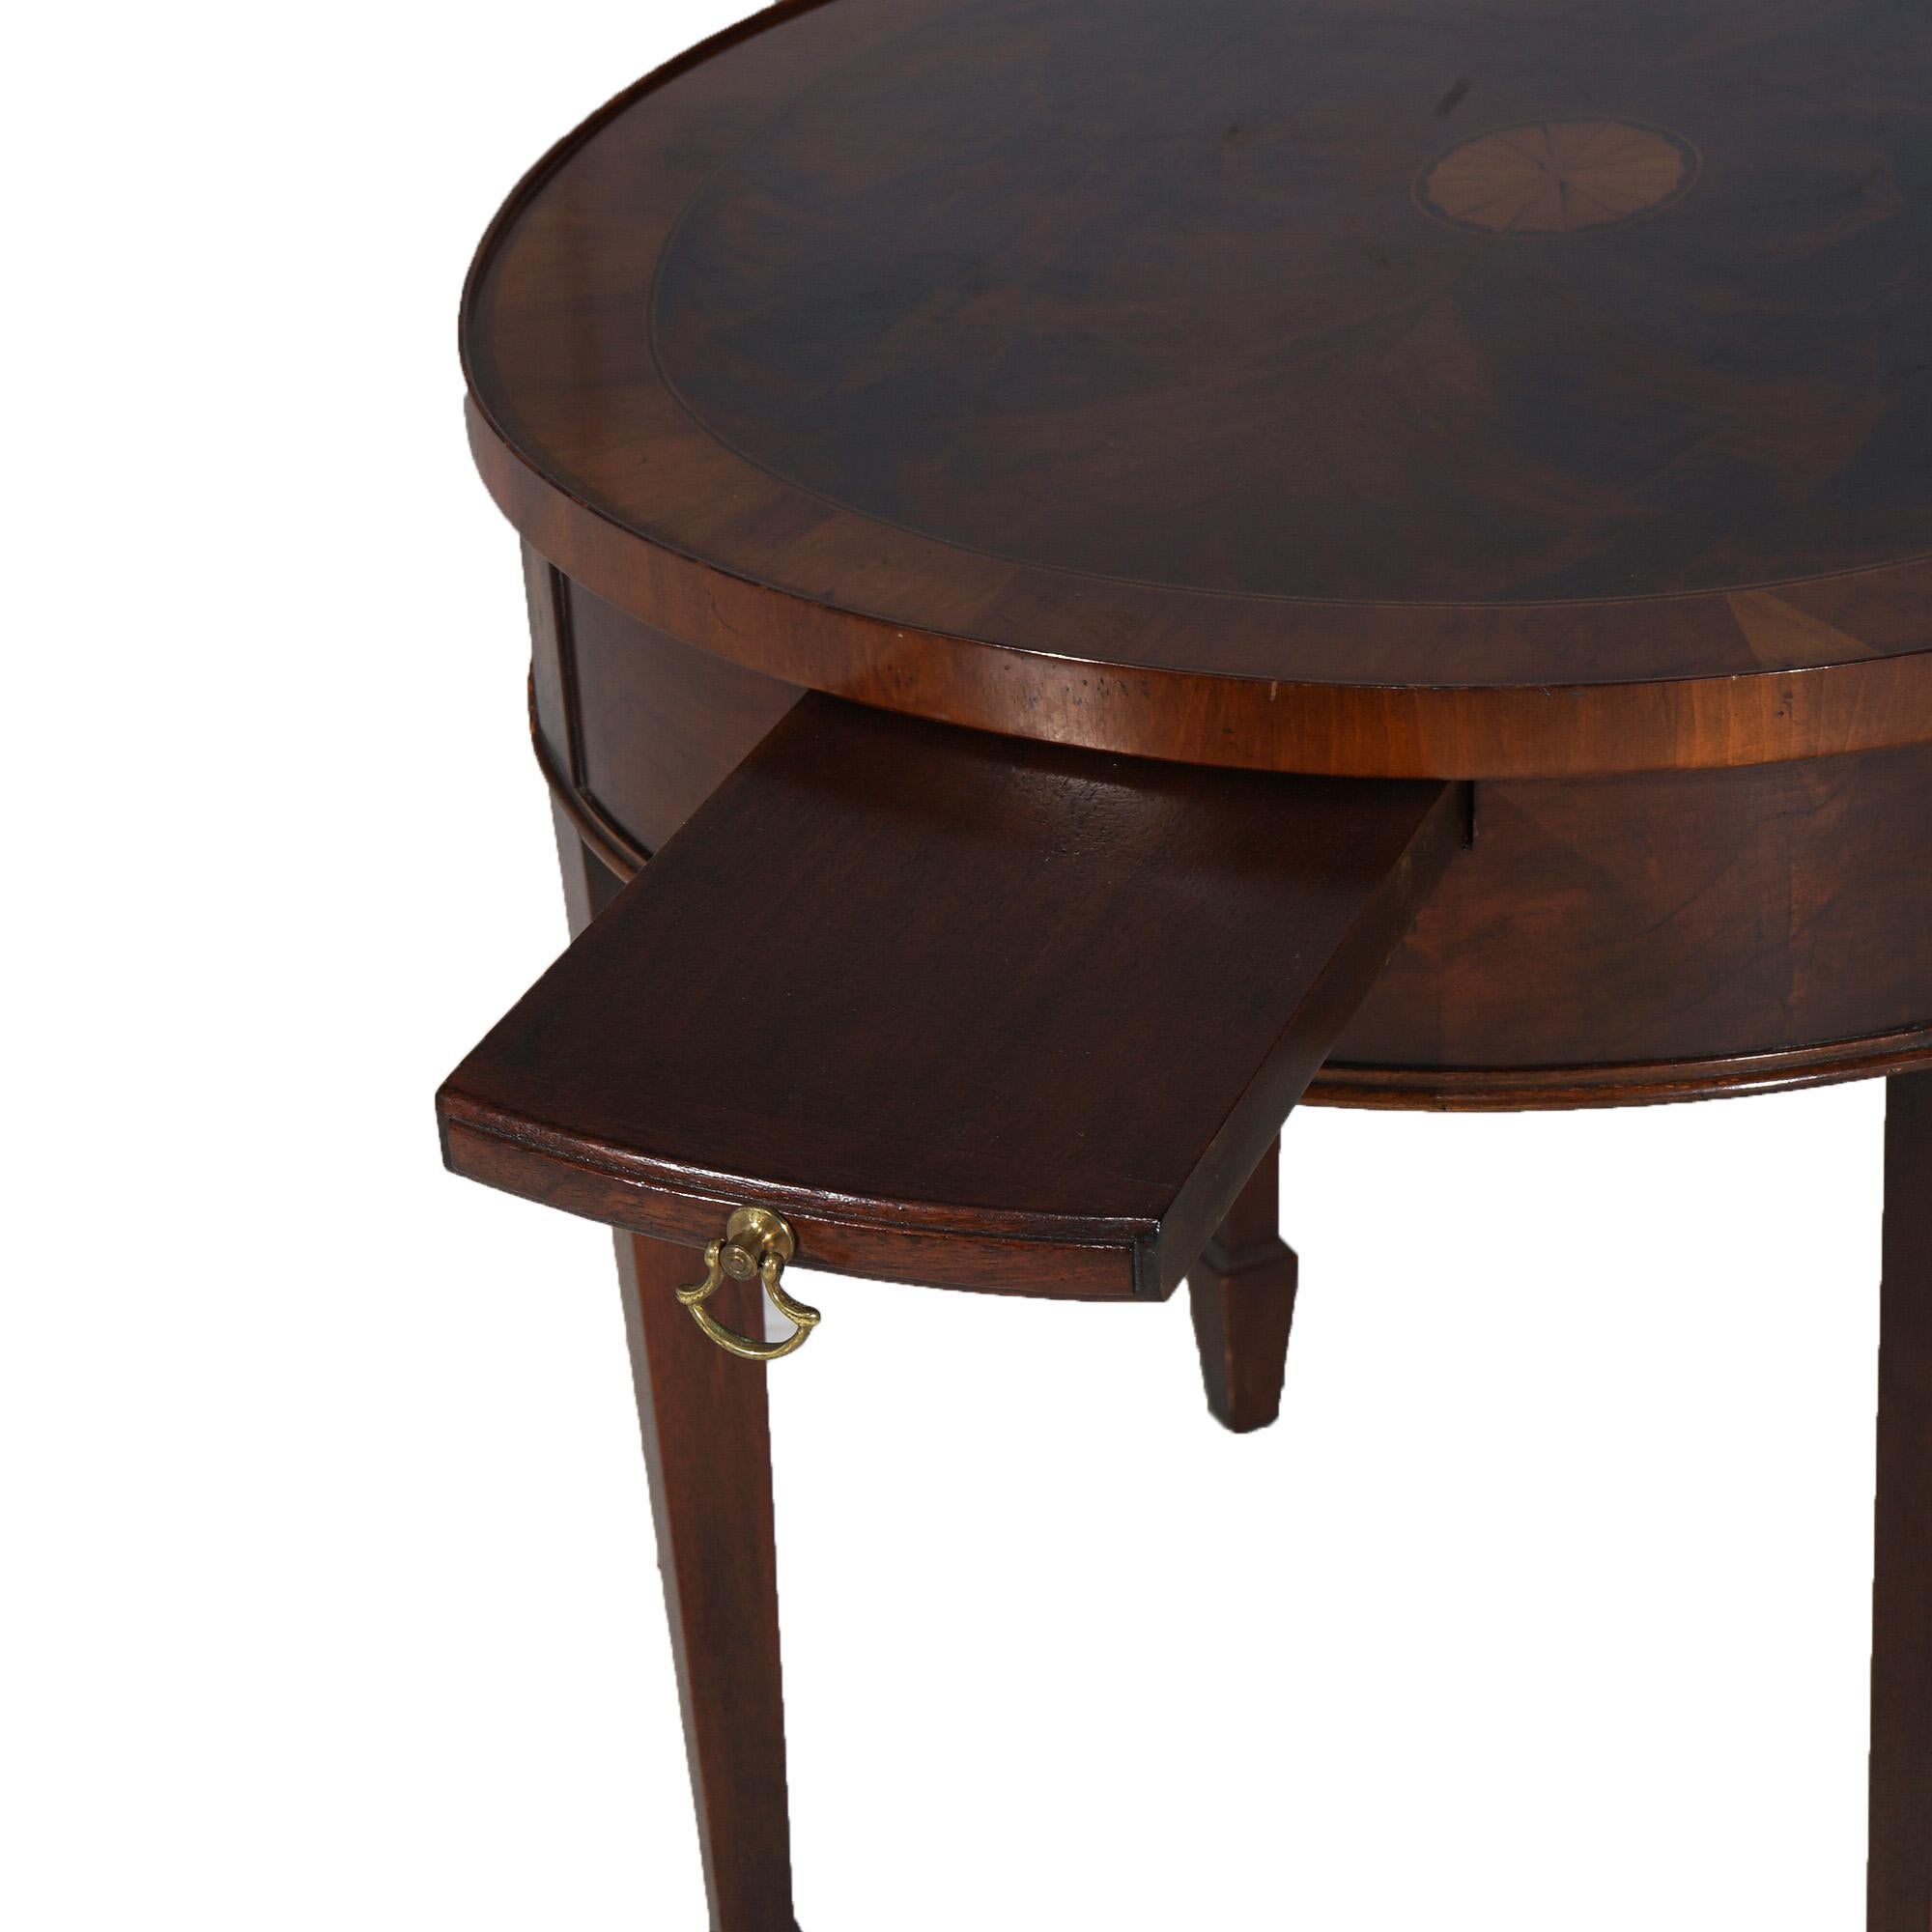 20th Century Hekman Copley Style Flame Mahogany & Satinwood Inlaid Side Table C1930